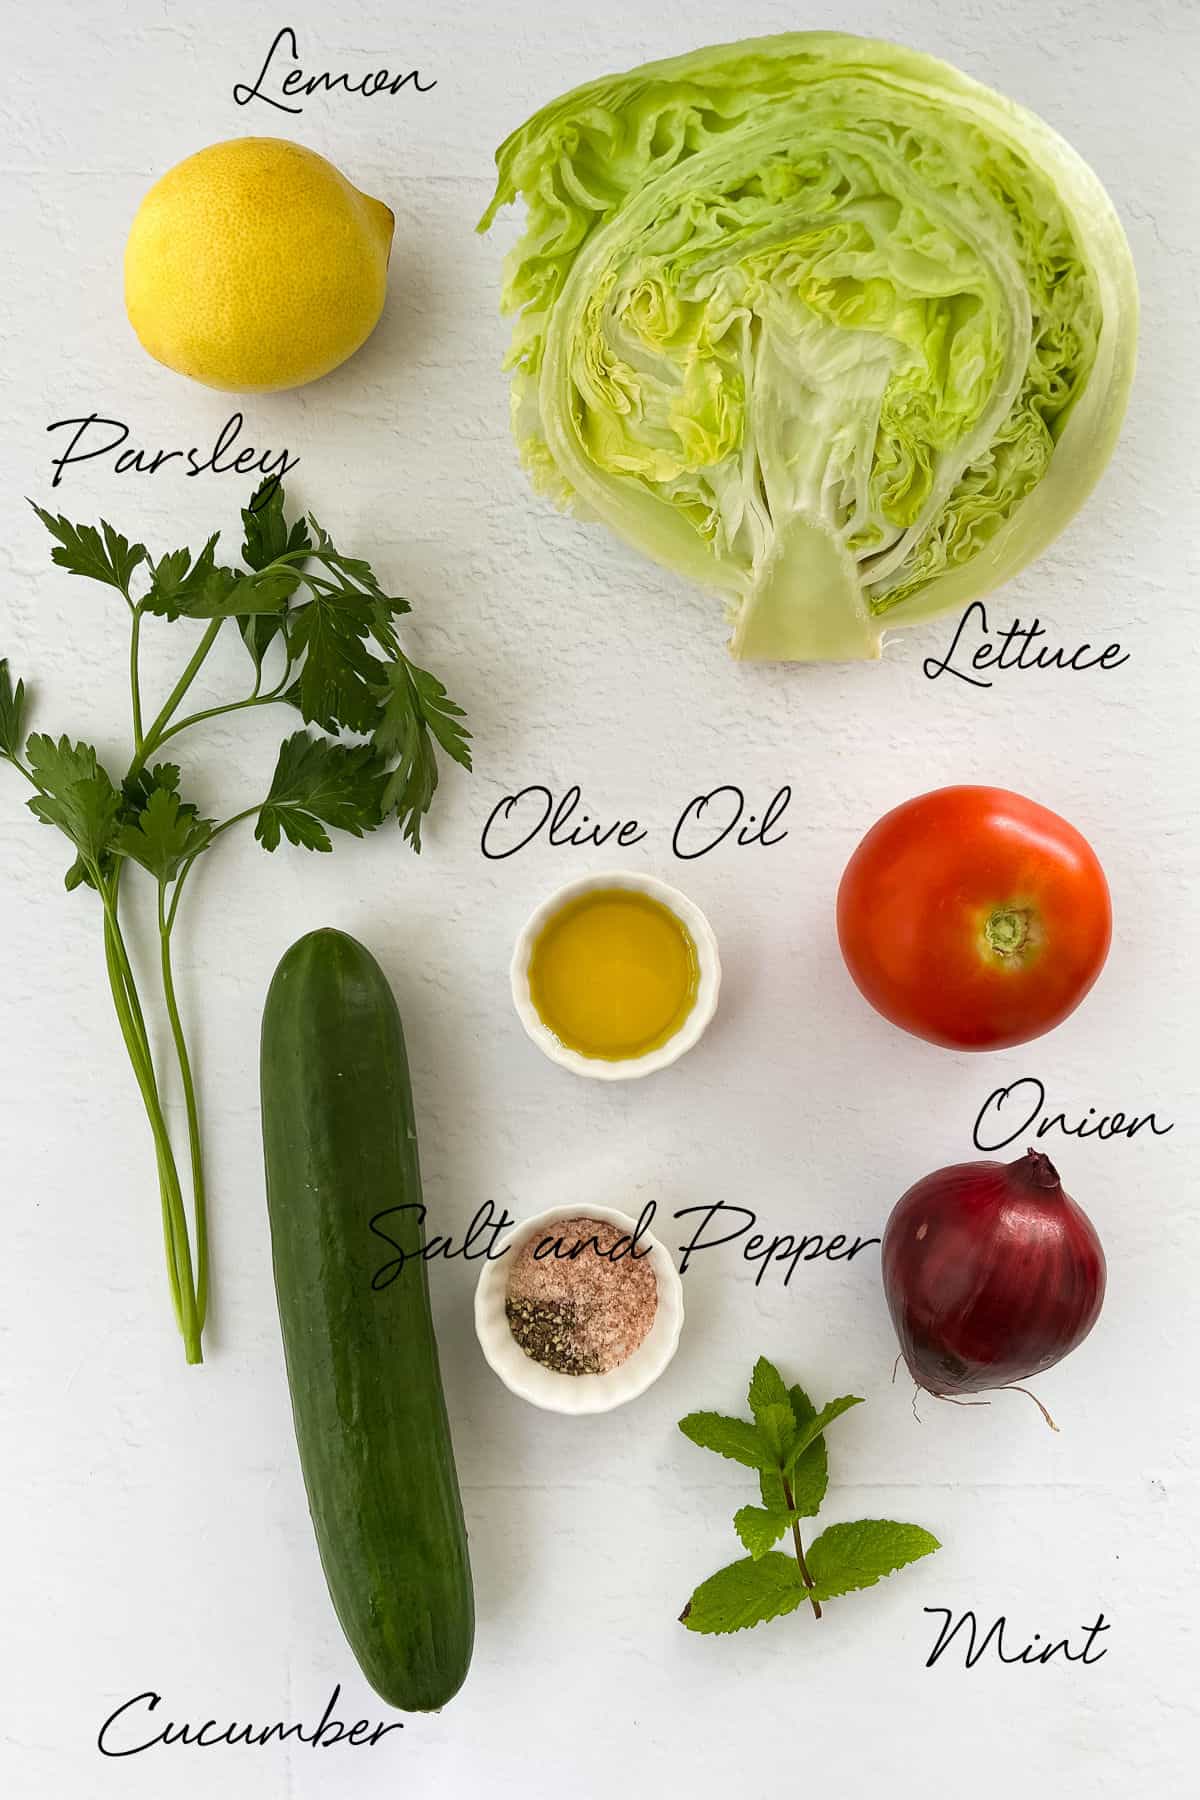 lettuce, tomato, lemon, onion, oil, parsley, cucumber and mint laid out on a white bench